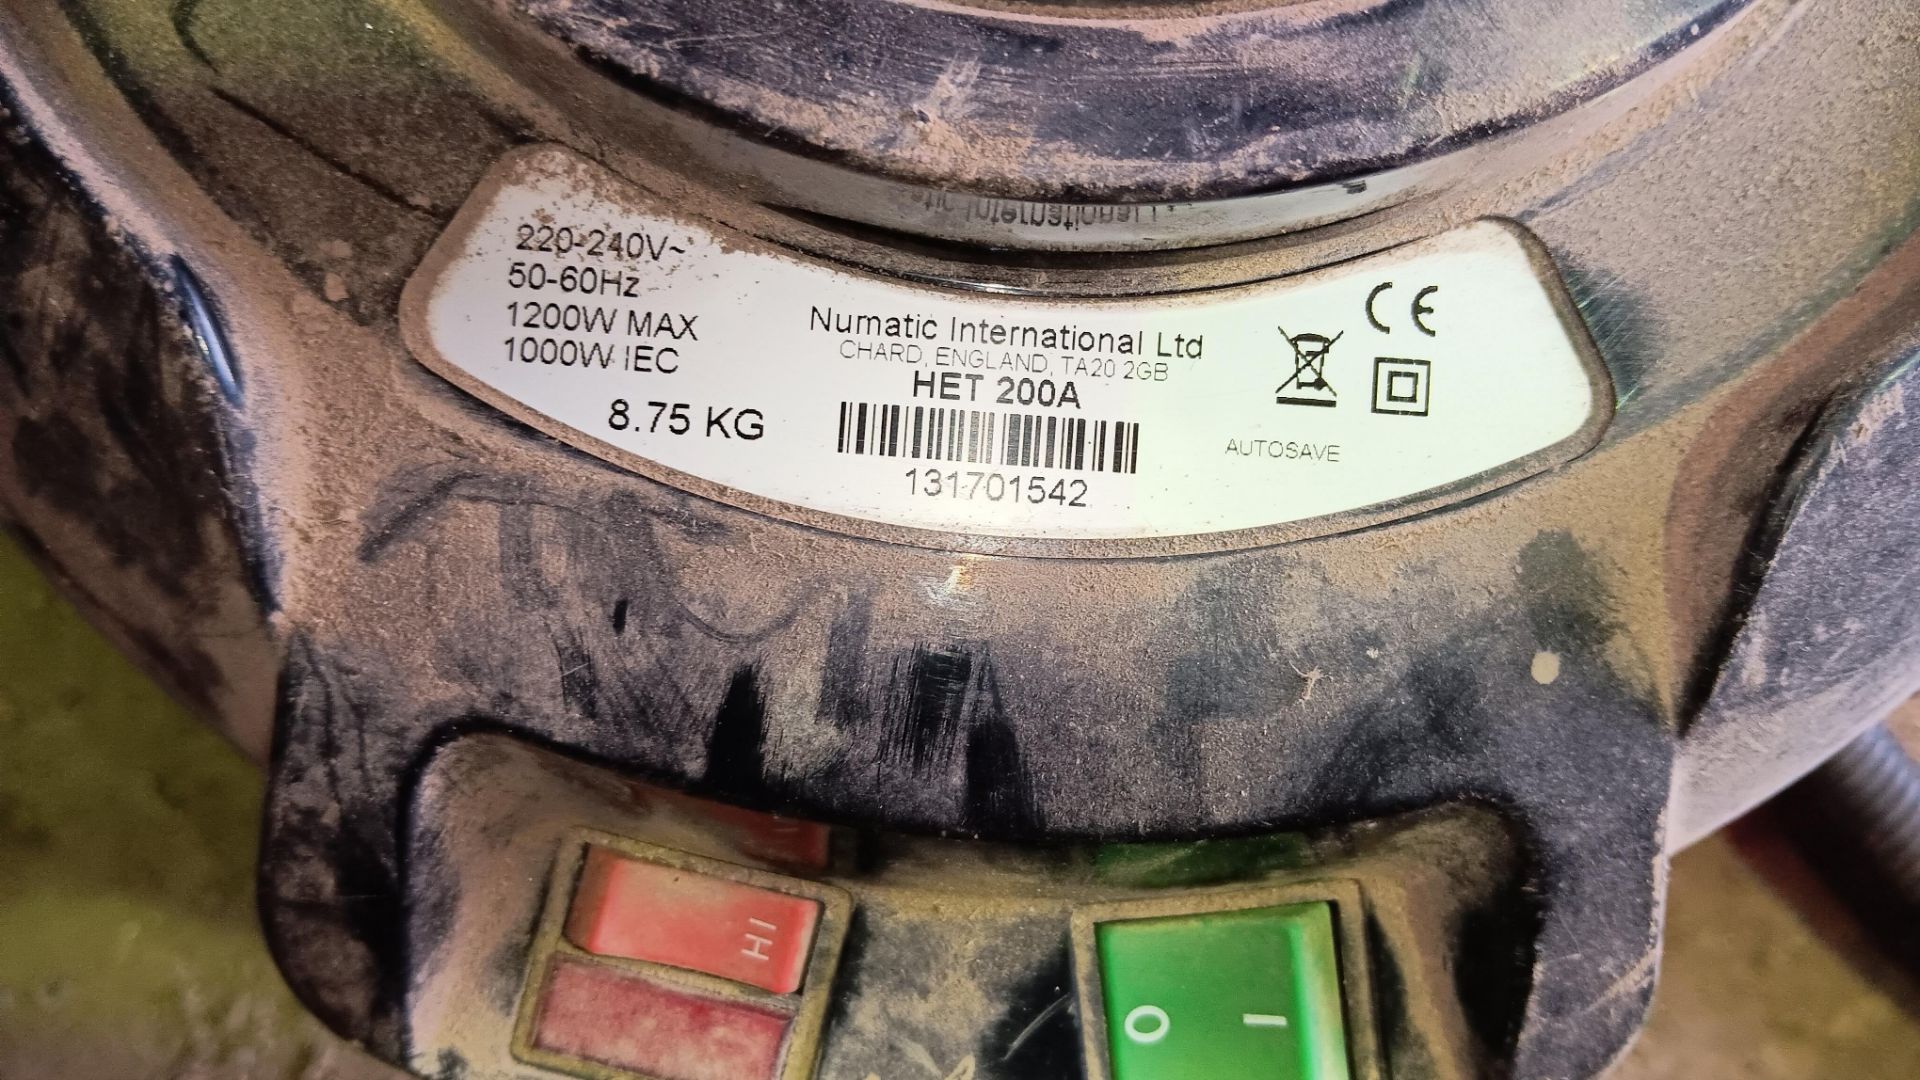 Numatic HET 200A Hetty vacuum cleaner, 240v, serial number 131701542 without attachments - Image 2 of 2